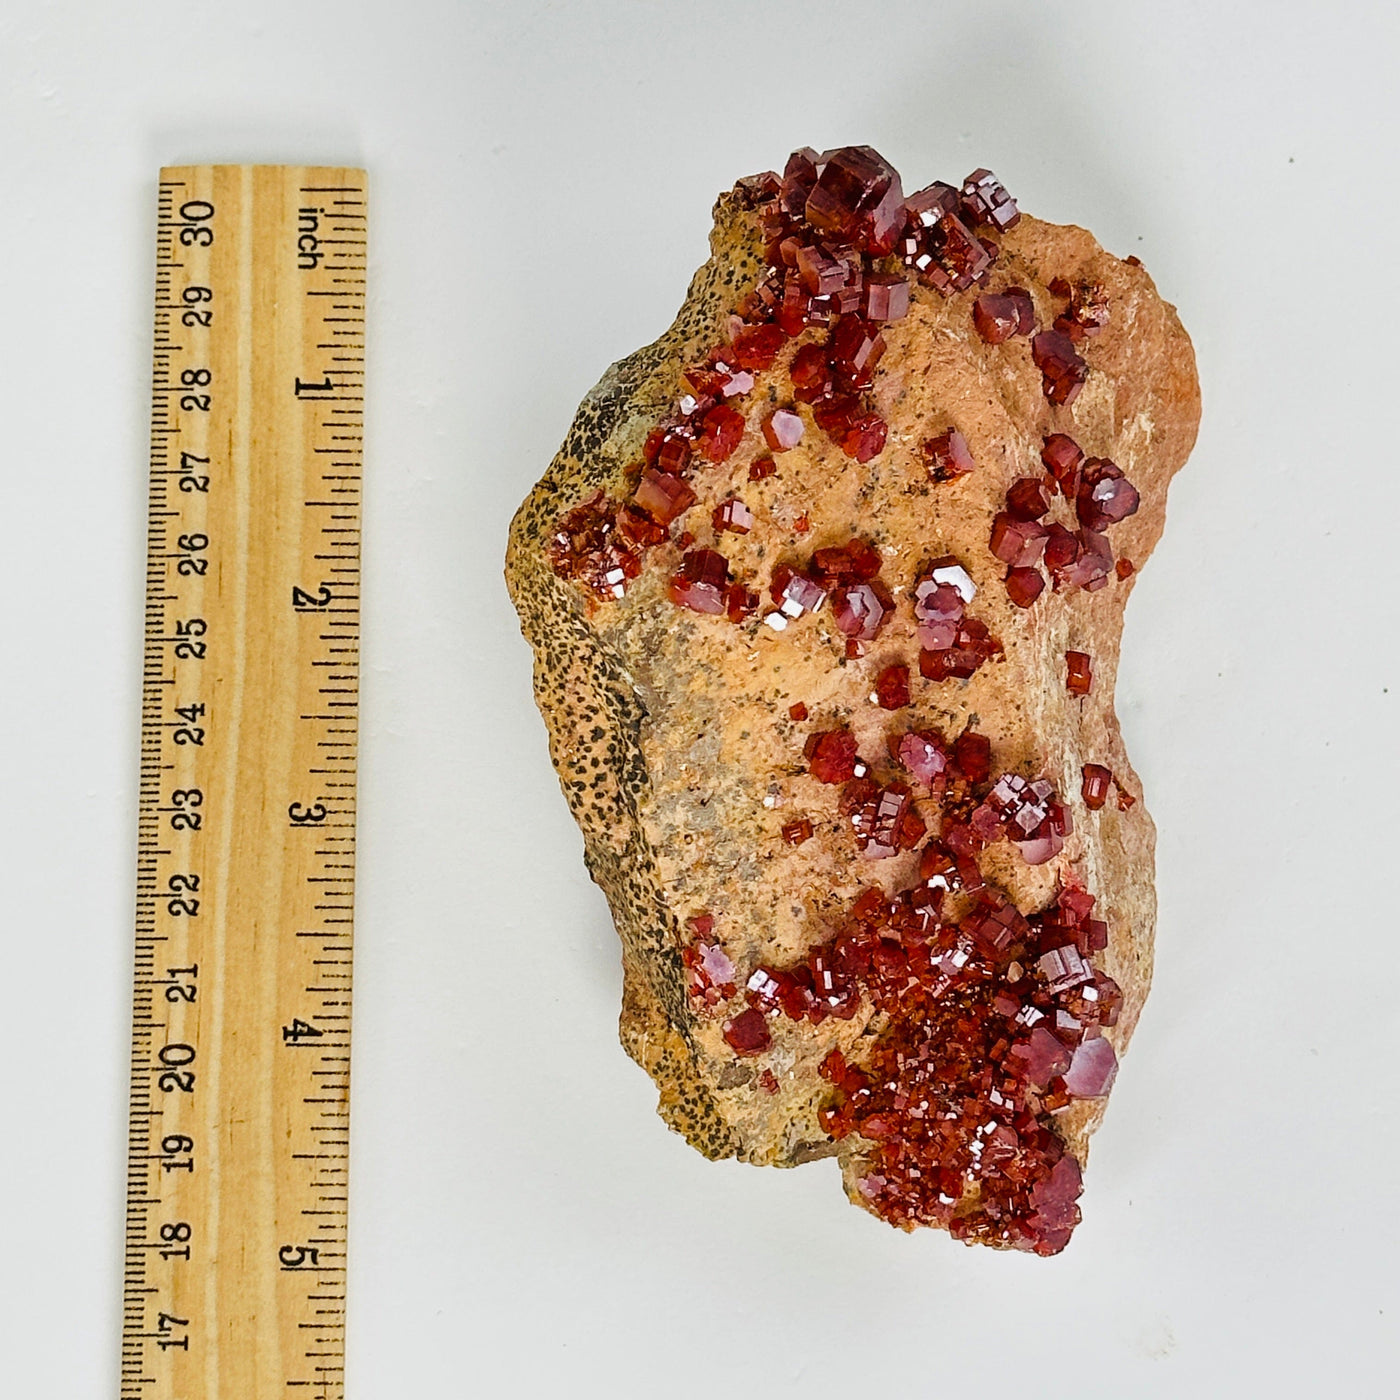 vanadinite next to a ruler for size reference